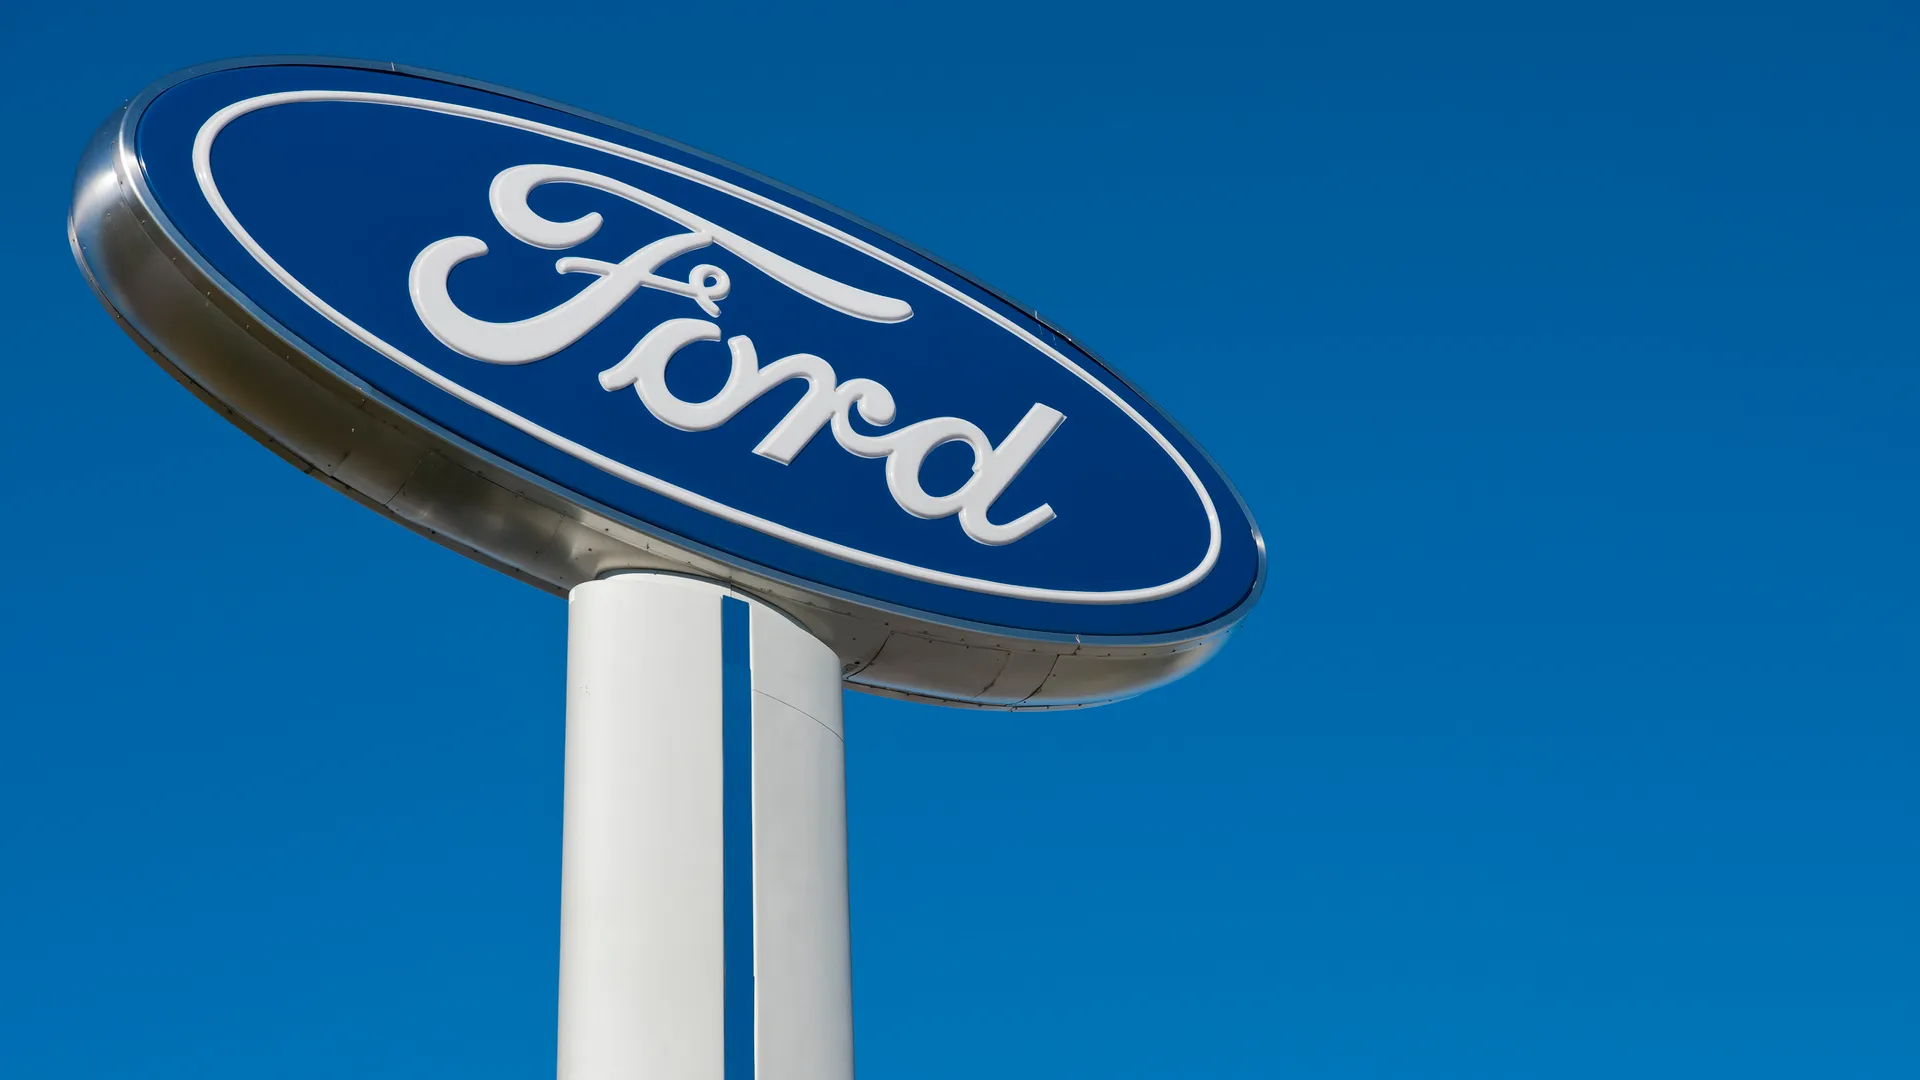 knoxville, tn usa - february 25, 2012: Ford sign at Ford dealership in knoxville, tn usa.